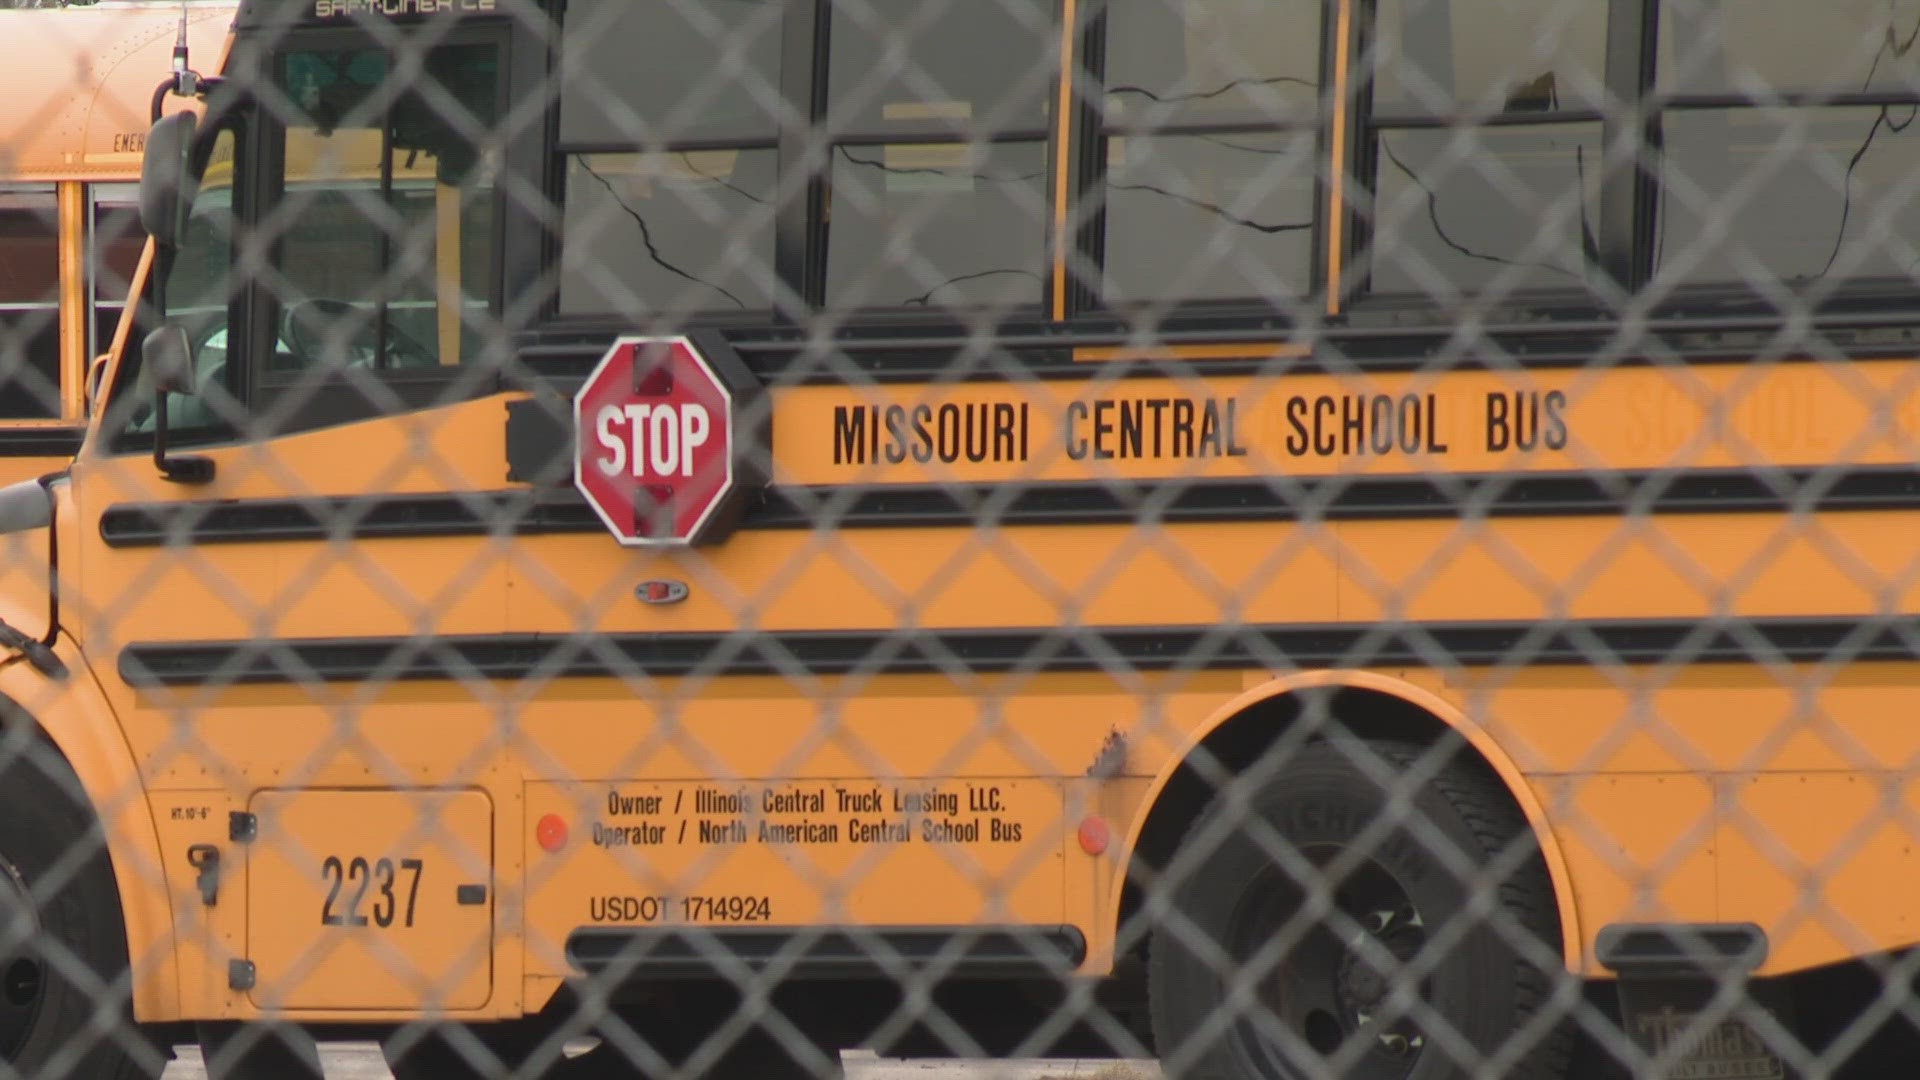 The bus company that gets St. Louis students to school announced Monday they’ll be going through a series of layoffs after terminating their contract with SLPS.